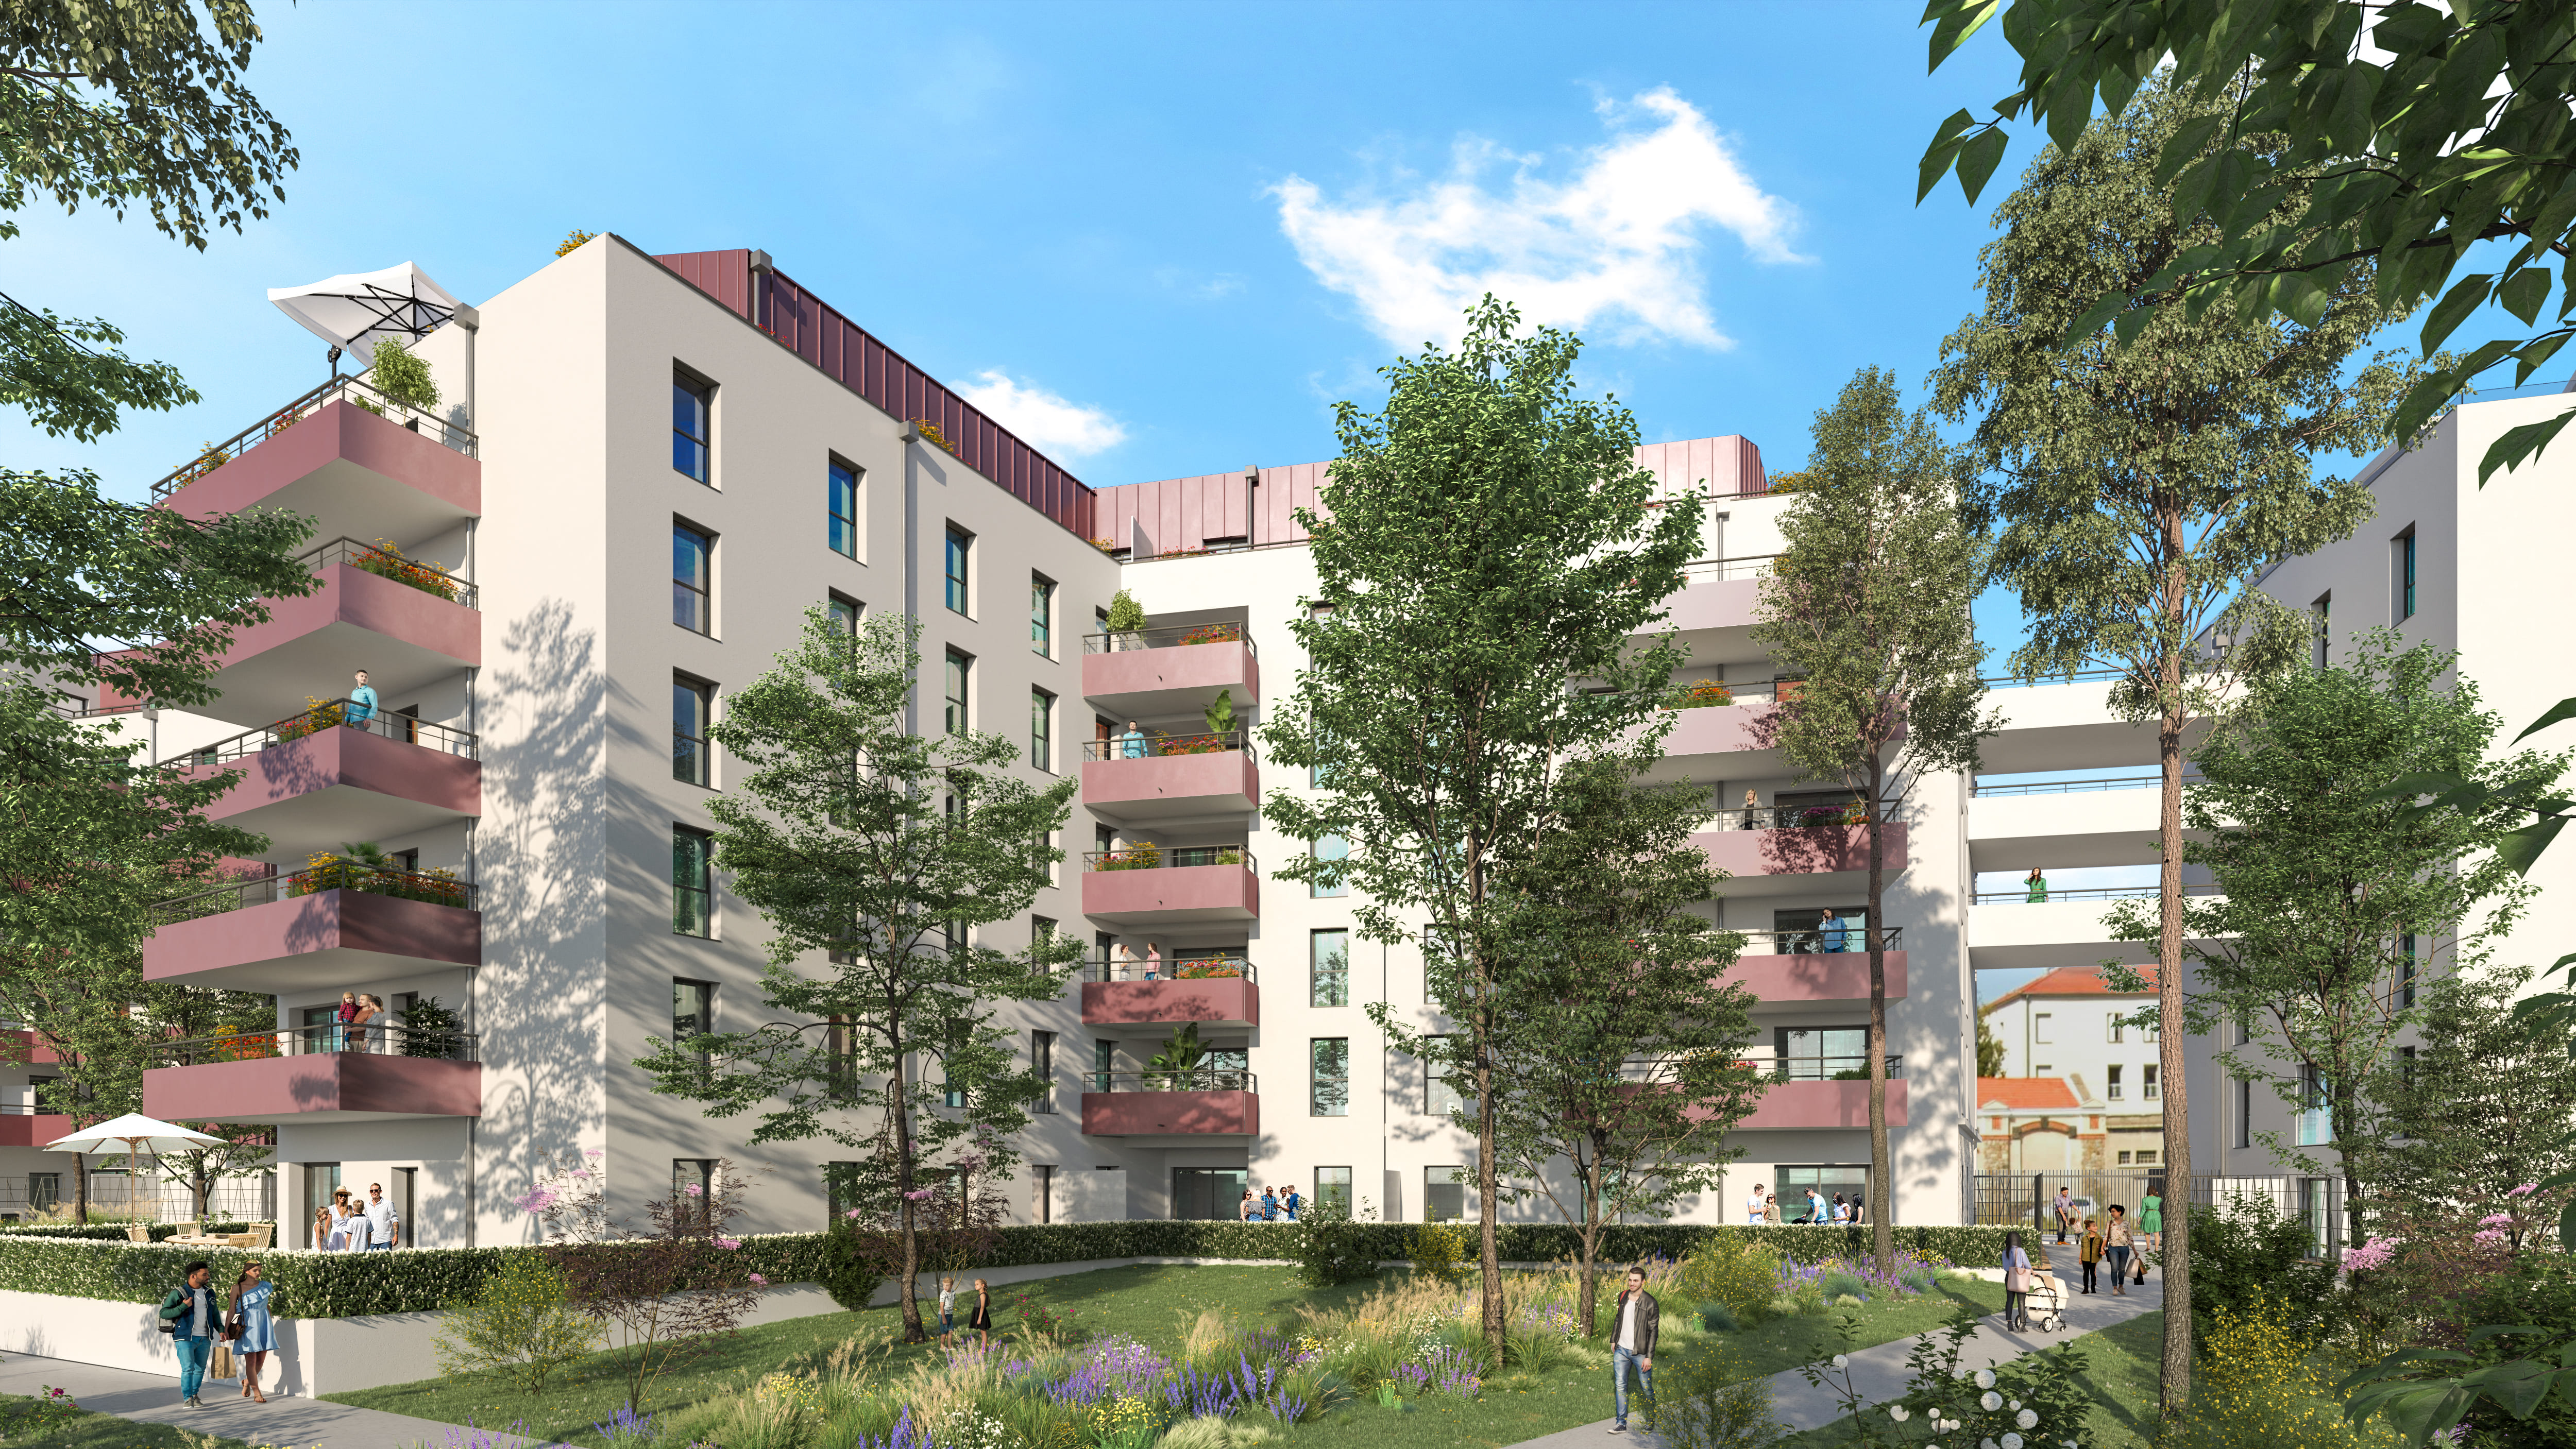 Programme immobilier neuf LES ALLÉES BLATIN - TRANCHE 3